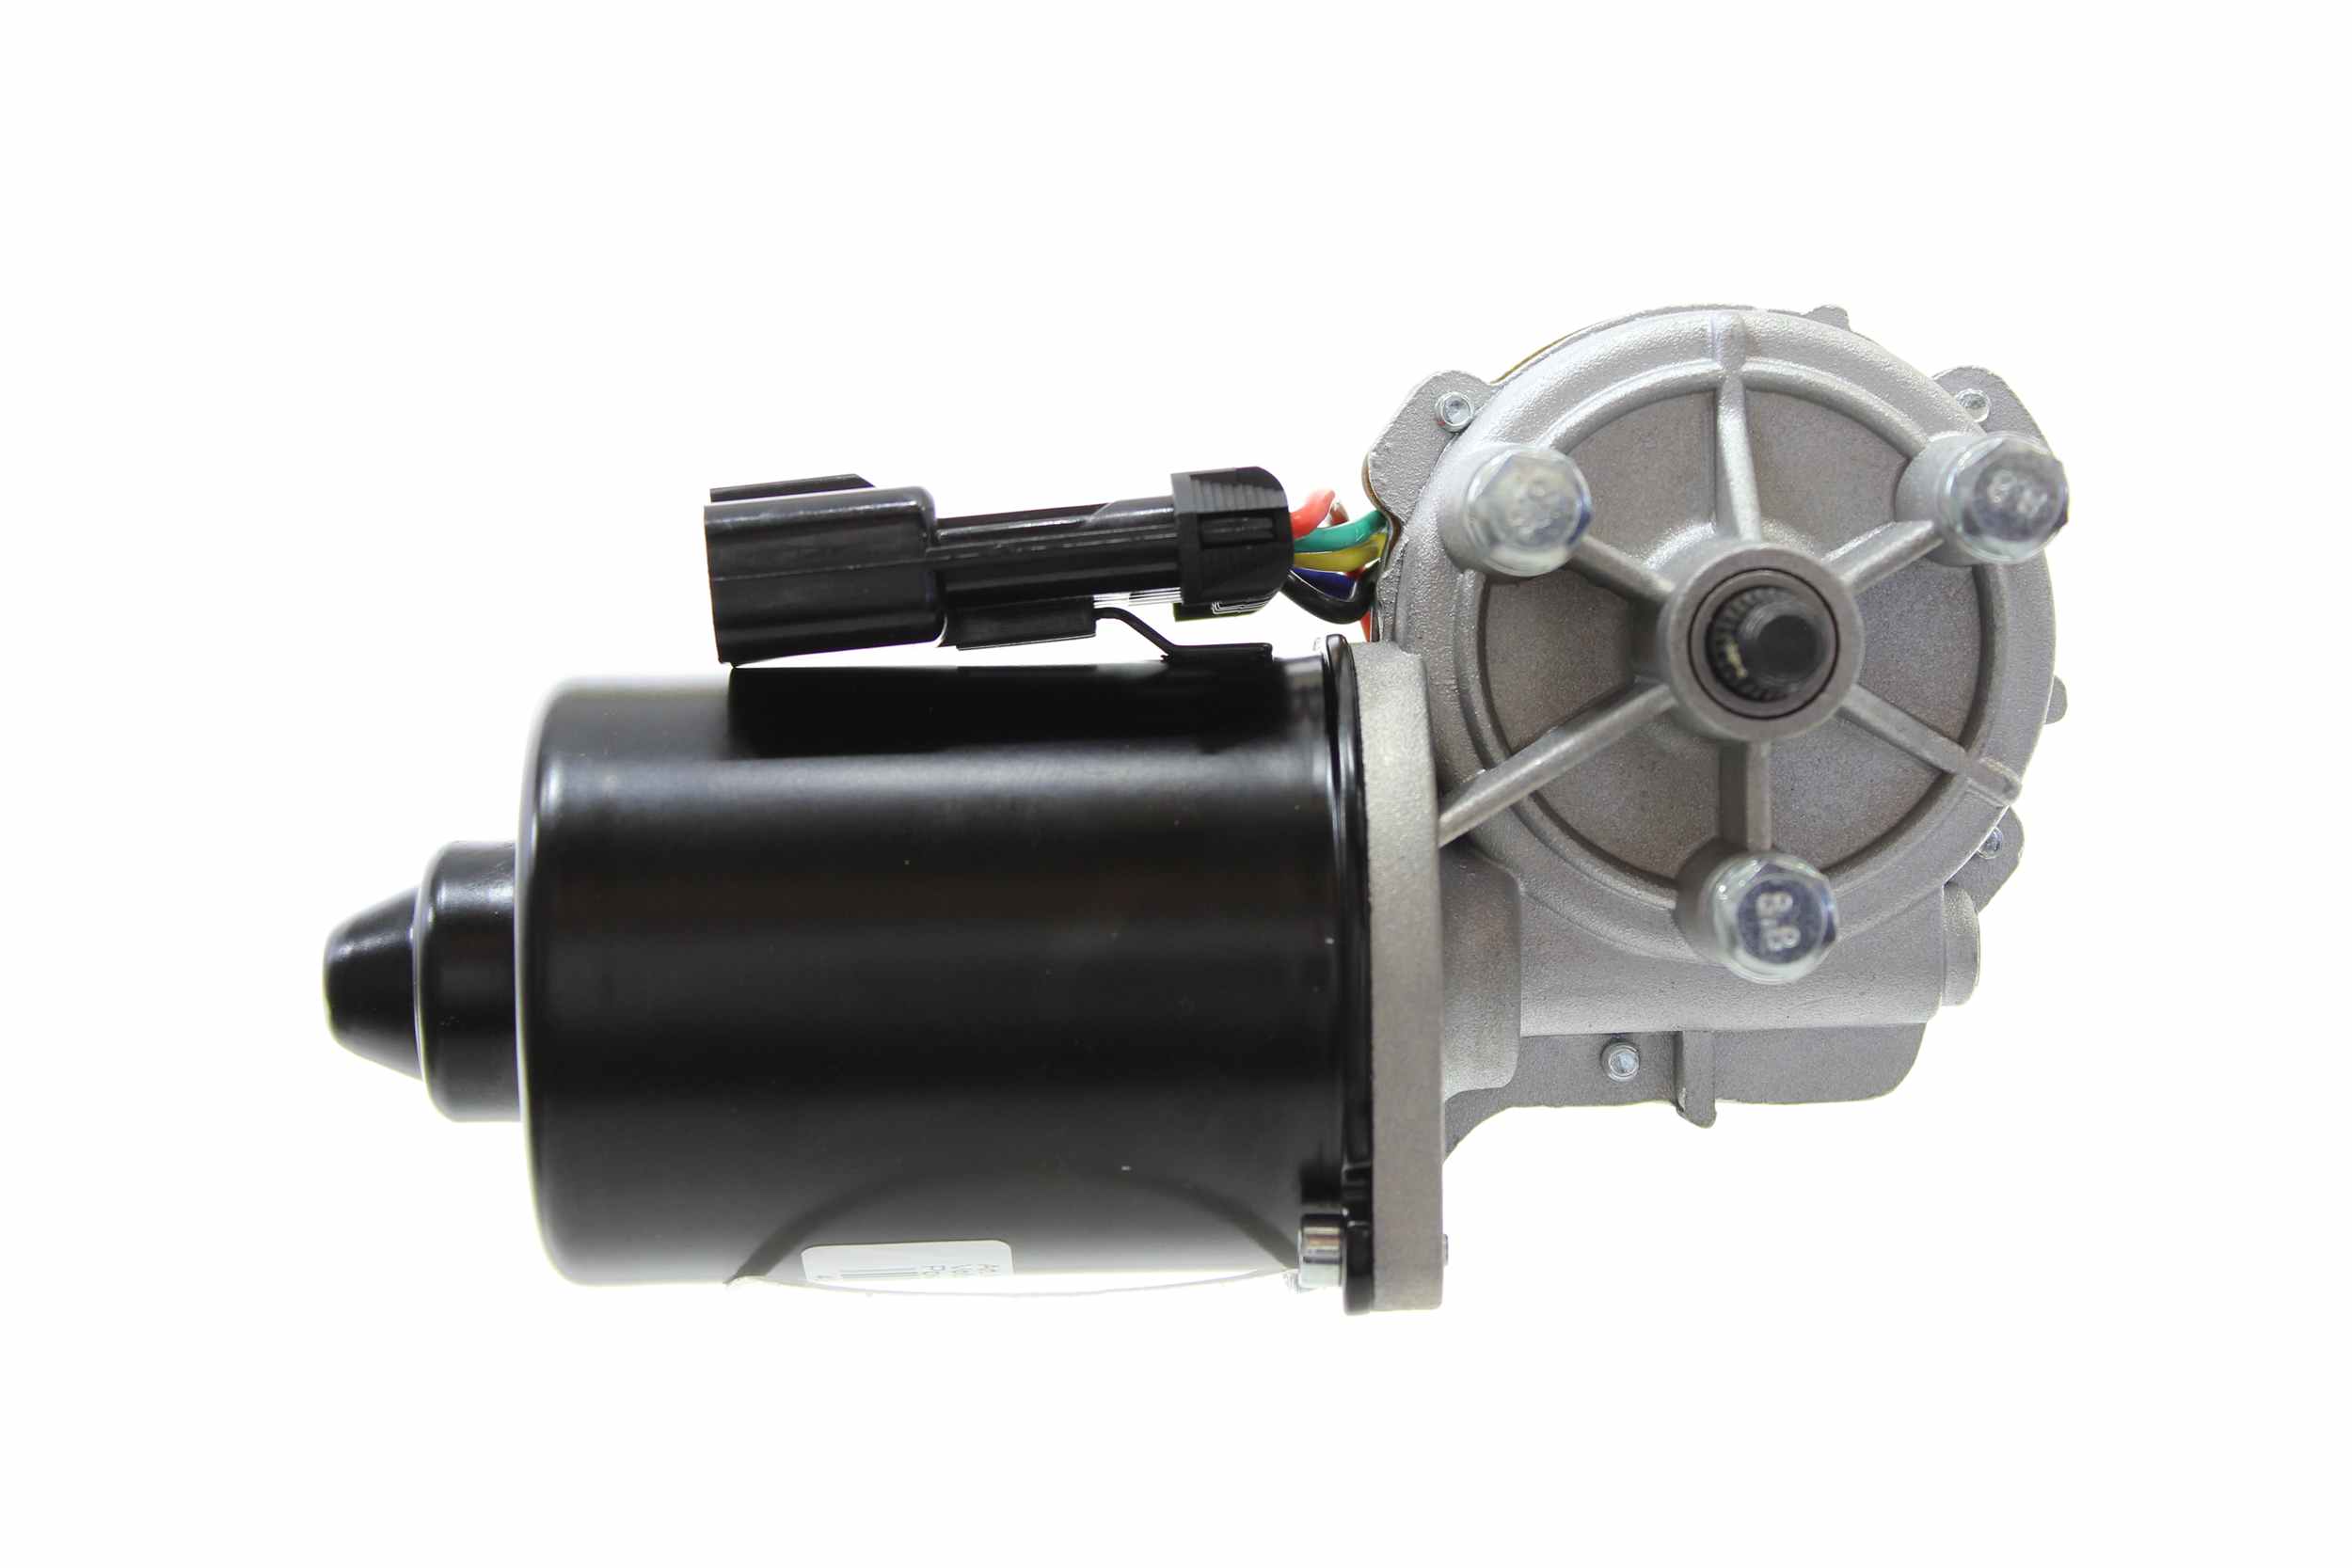 ALANKO 10800081 Wiper motor 12V, Front, for left-hand/right-hand drive vehicles